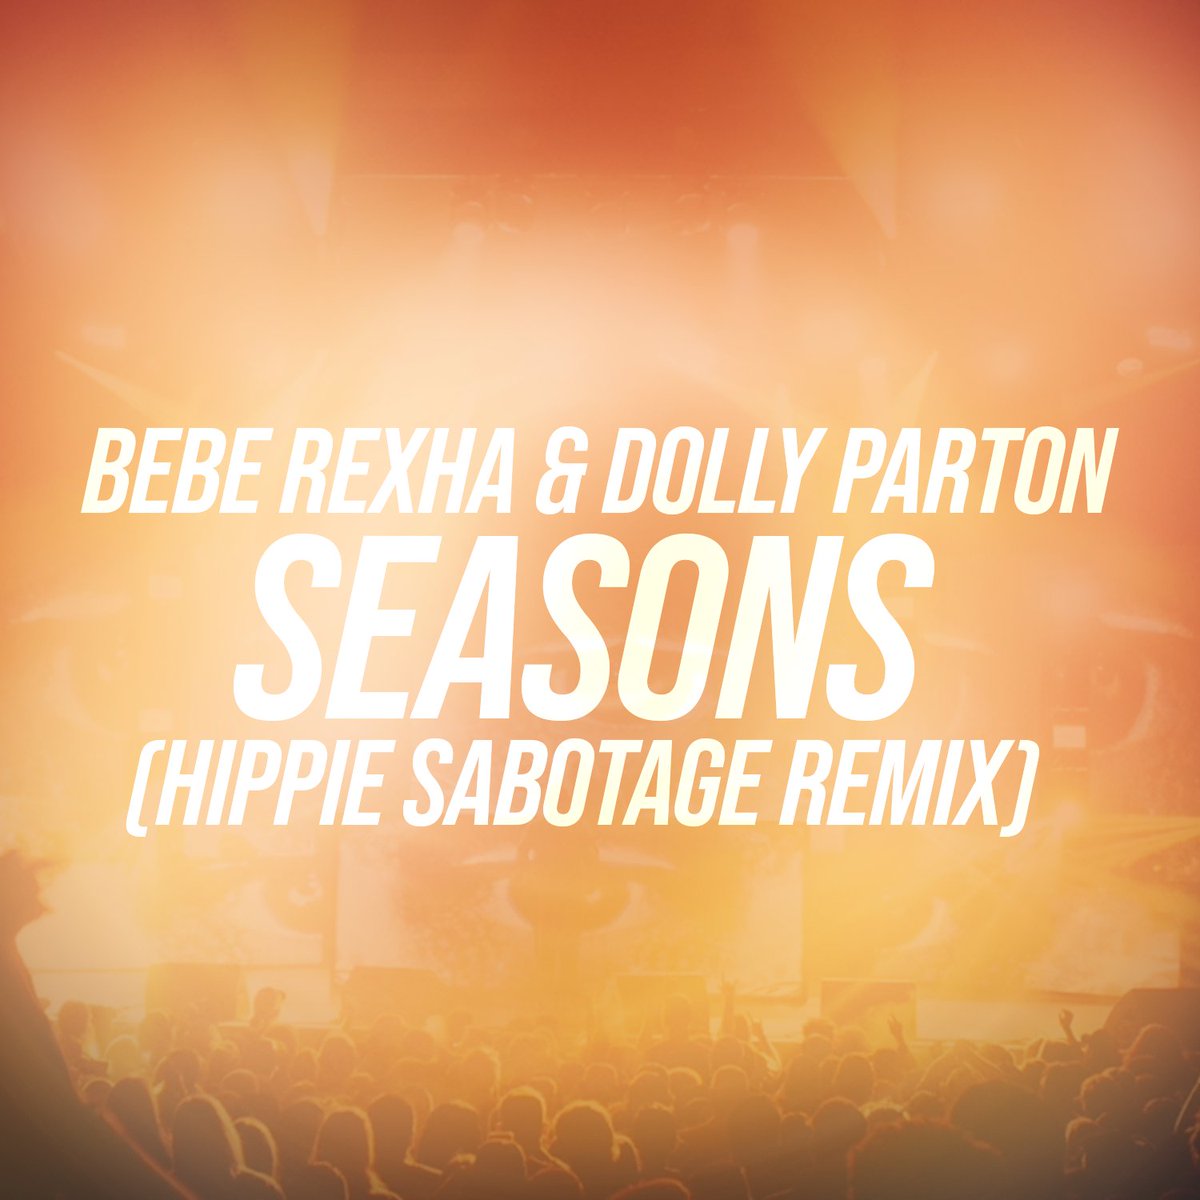 new flip! check out the hippie sabotage remix to 'seasons' by @BebeRexha & @DollyParton: tr.ee/hipsabseasonsr…